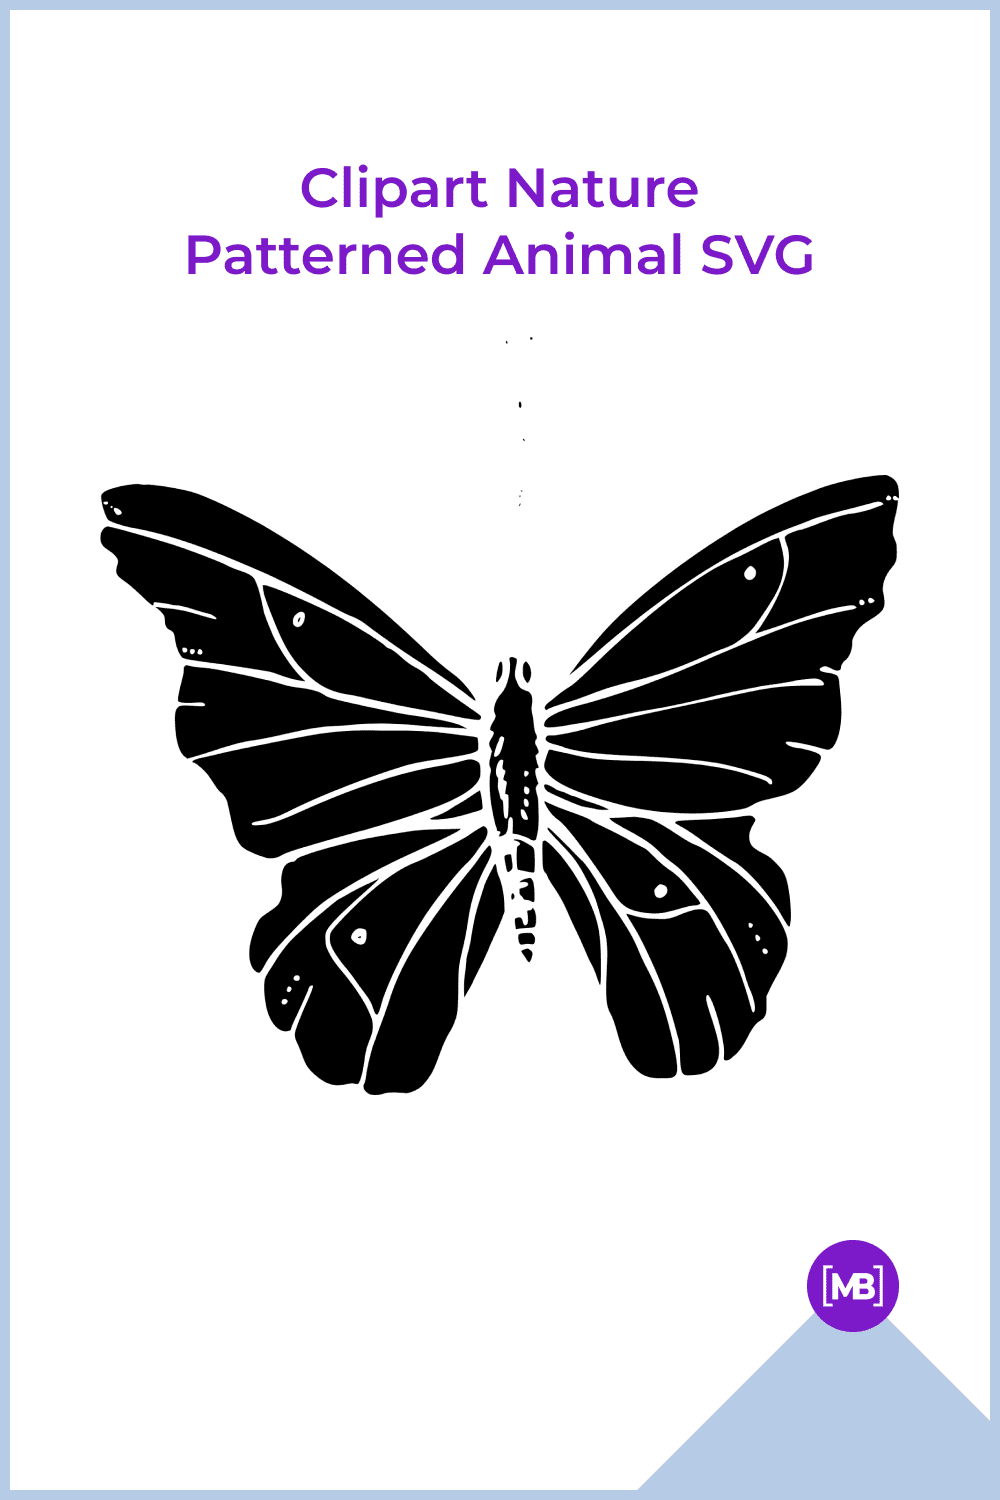 Clipart Nature Patterned Animal SVG.